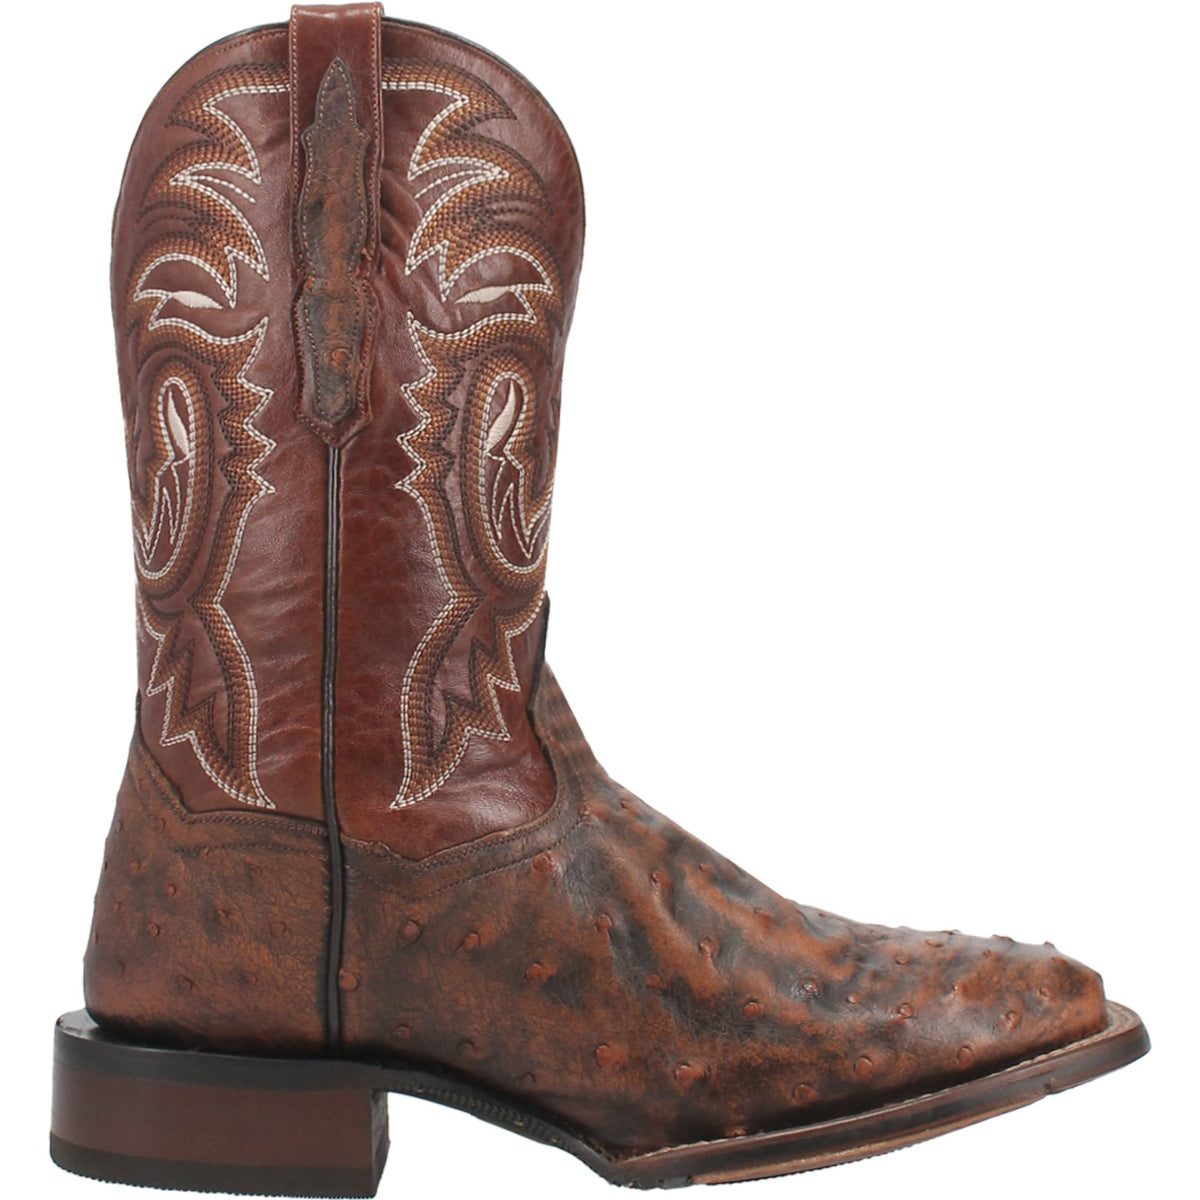 DILLINGER FULL QUILL OSTRICH BOOT Cover